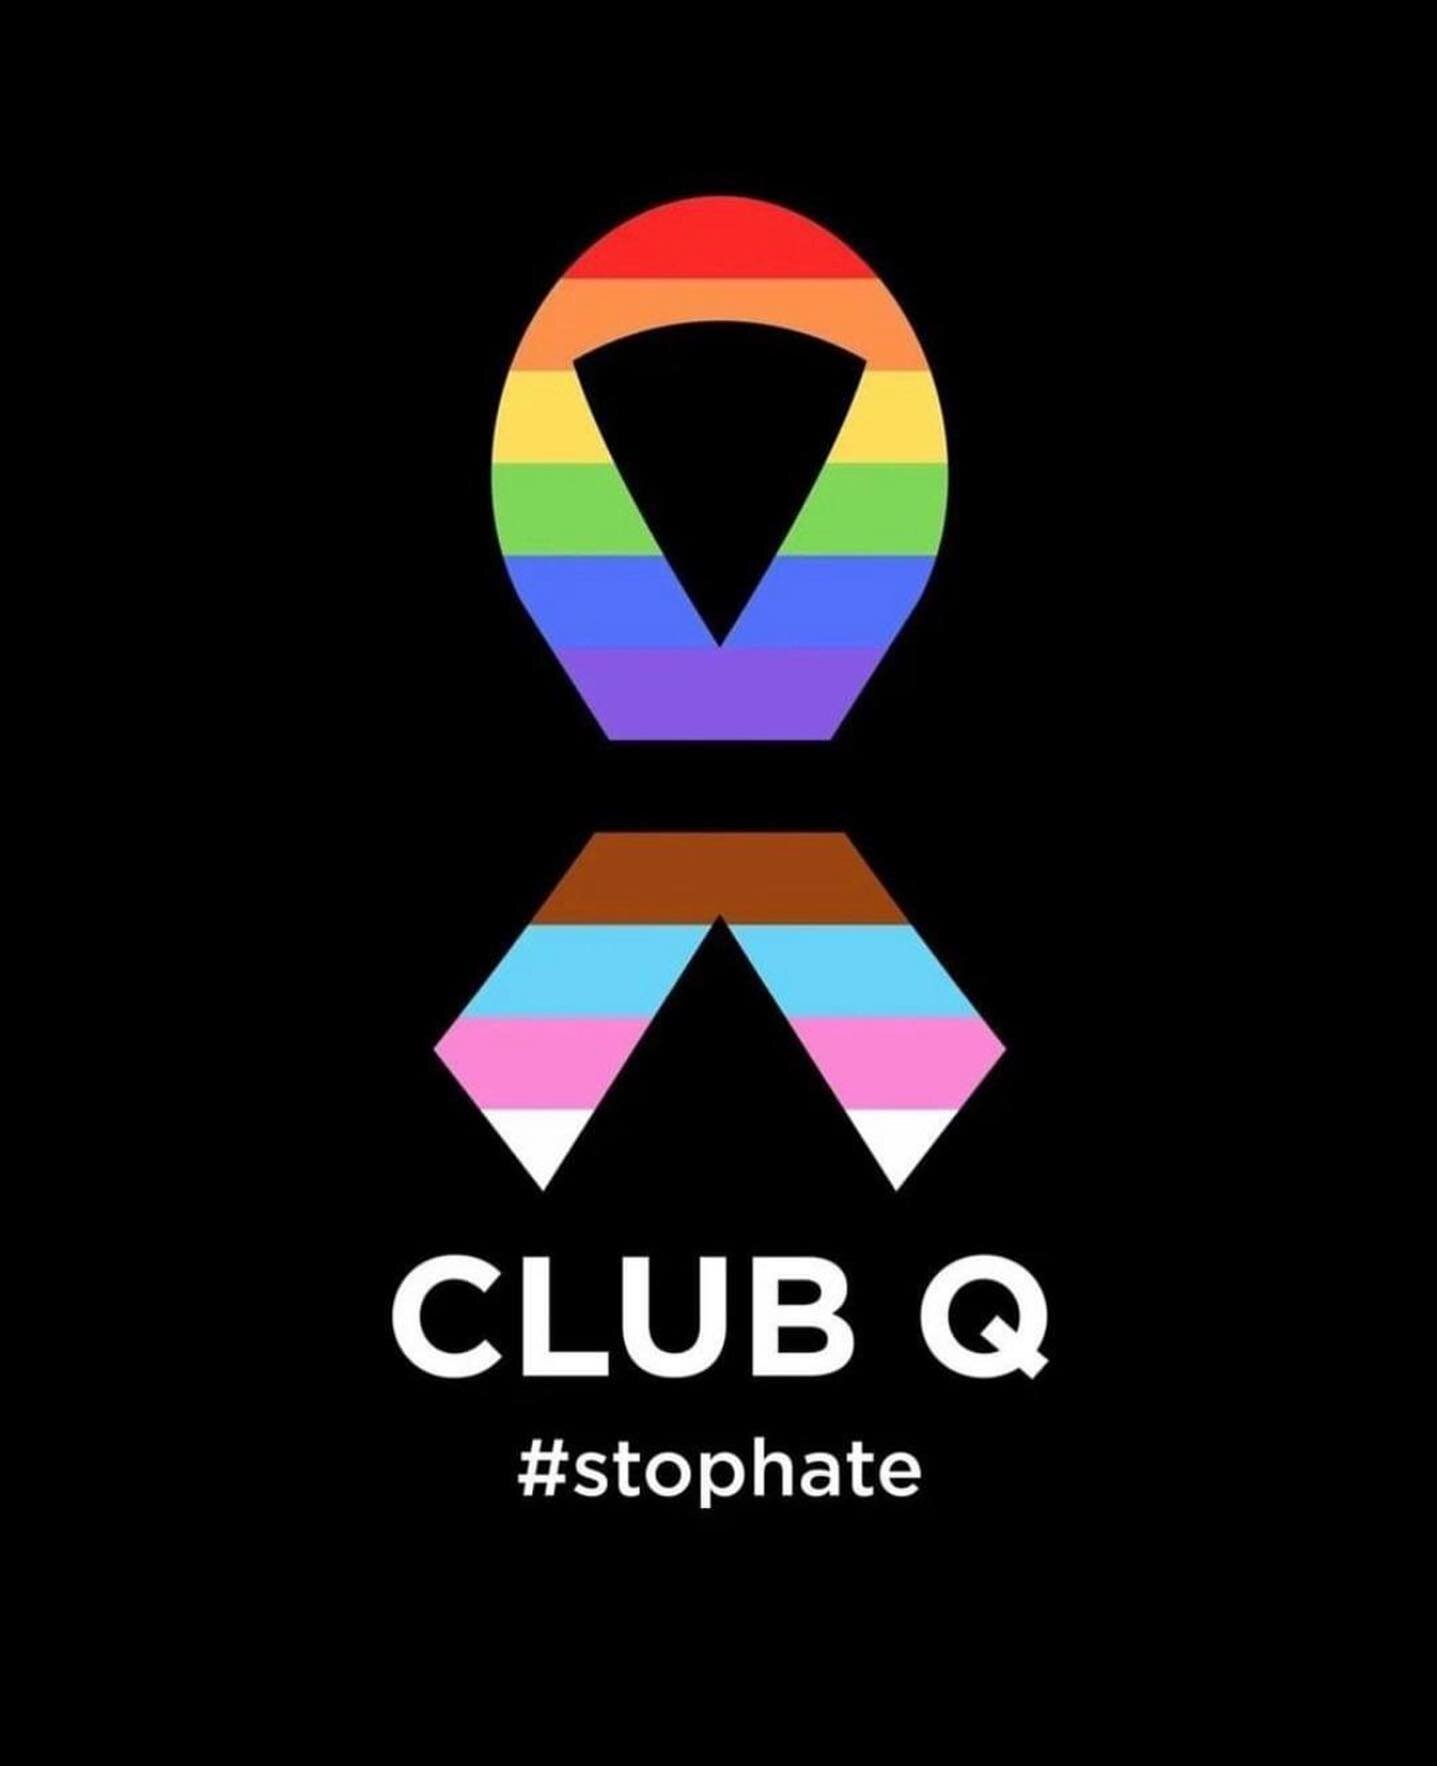 We are heartbroken, devastated, and angered. Another senseless, hate-filled act has taken the lives of five individuals and forever changed the lives of many more. 

We stand with the LGBTQ+ community.